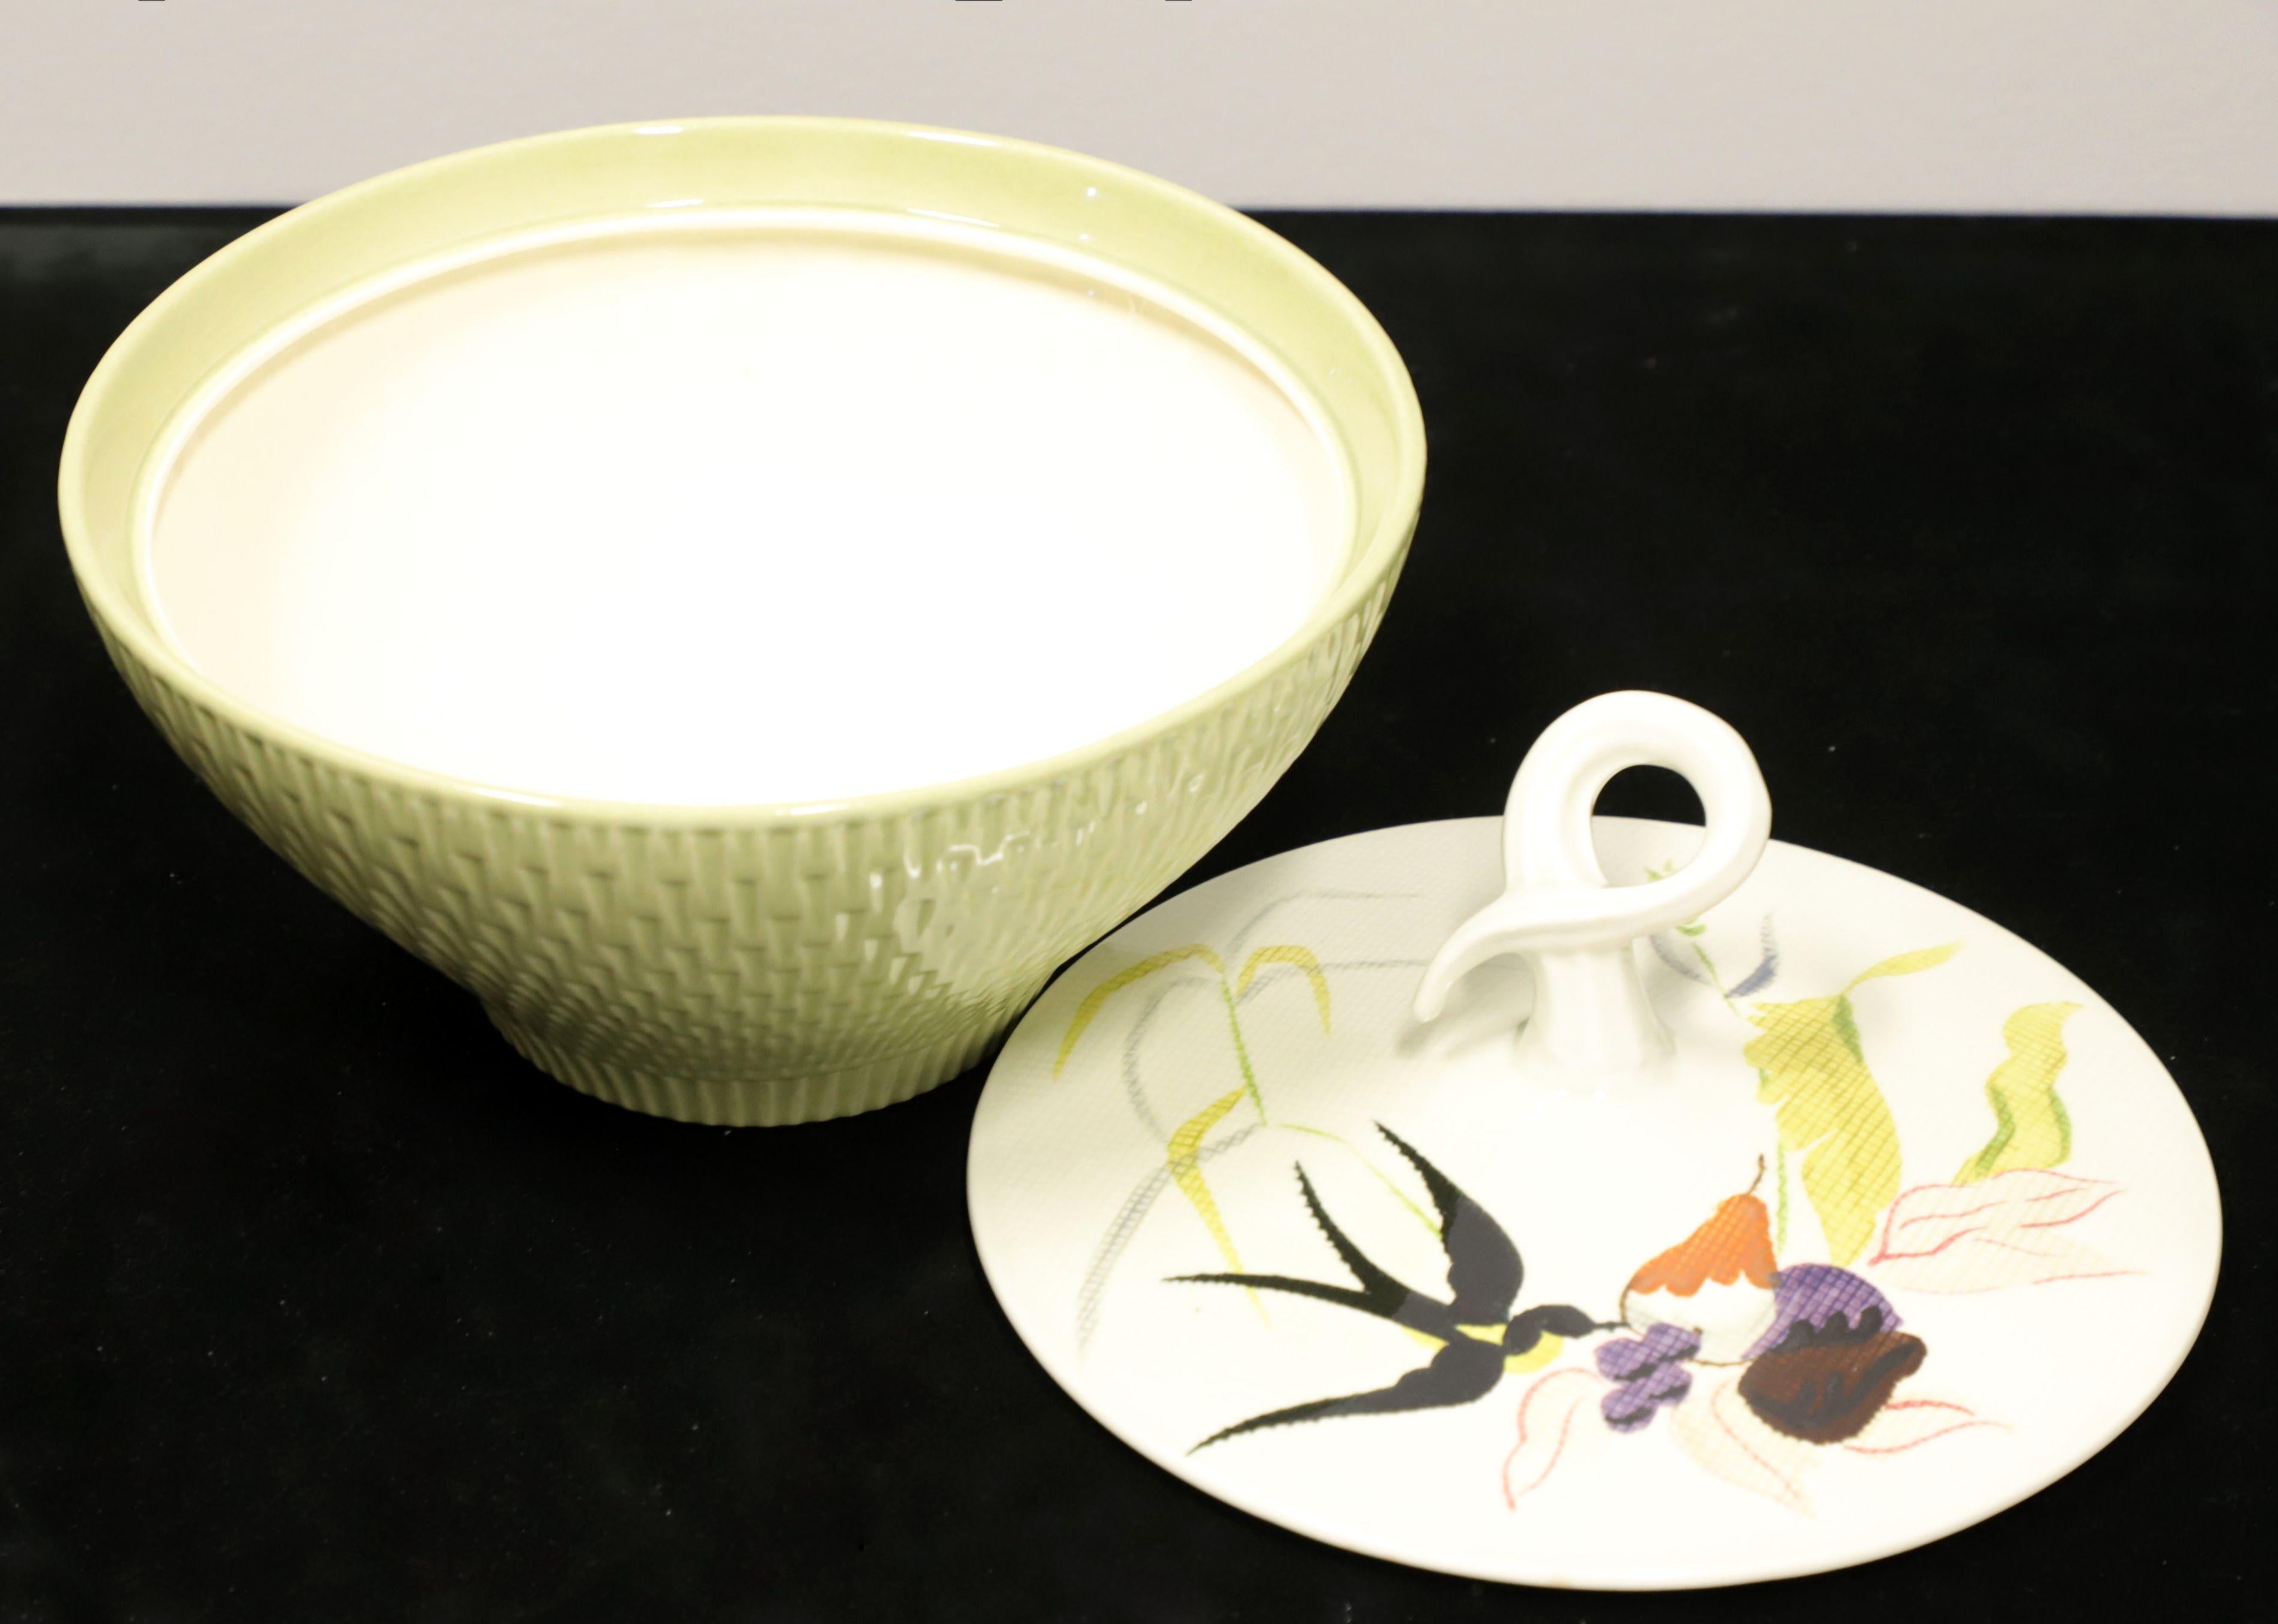 A Mid 20th Century serving bowl with lid by Red Wing, in their Capistrano pattern. Bowl has a round shape, smooth cream color interior and sage green color basket weave exterior. Lid has a unique curled stem-like handle and is hand painted depicting